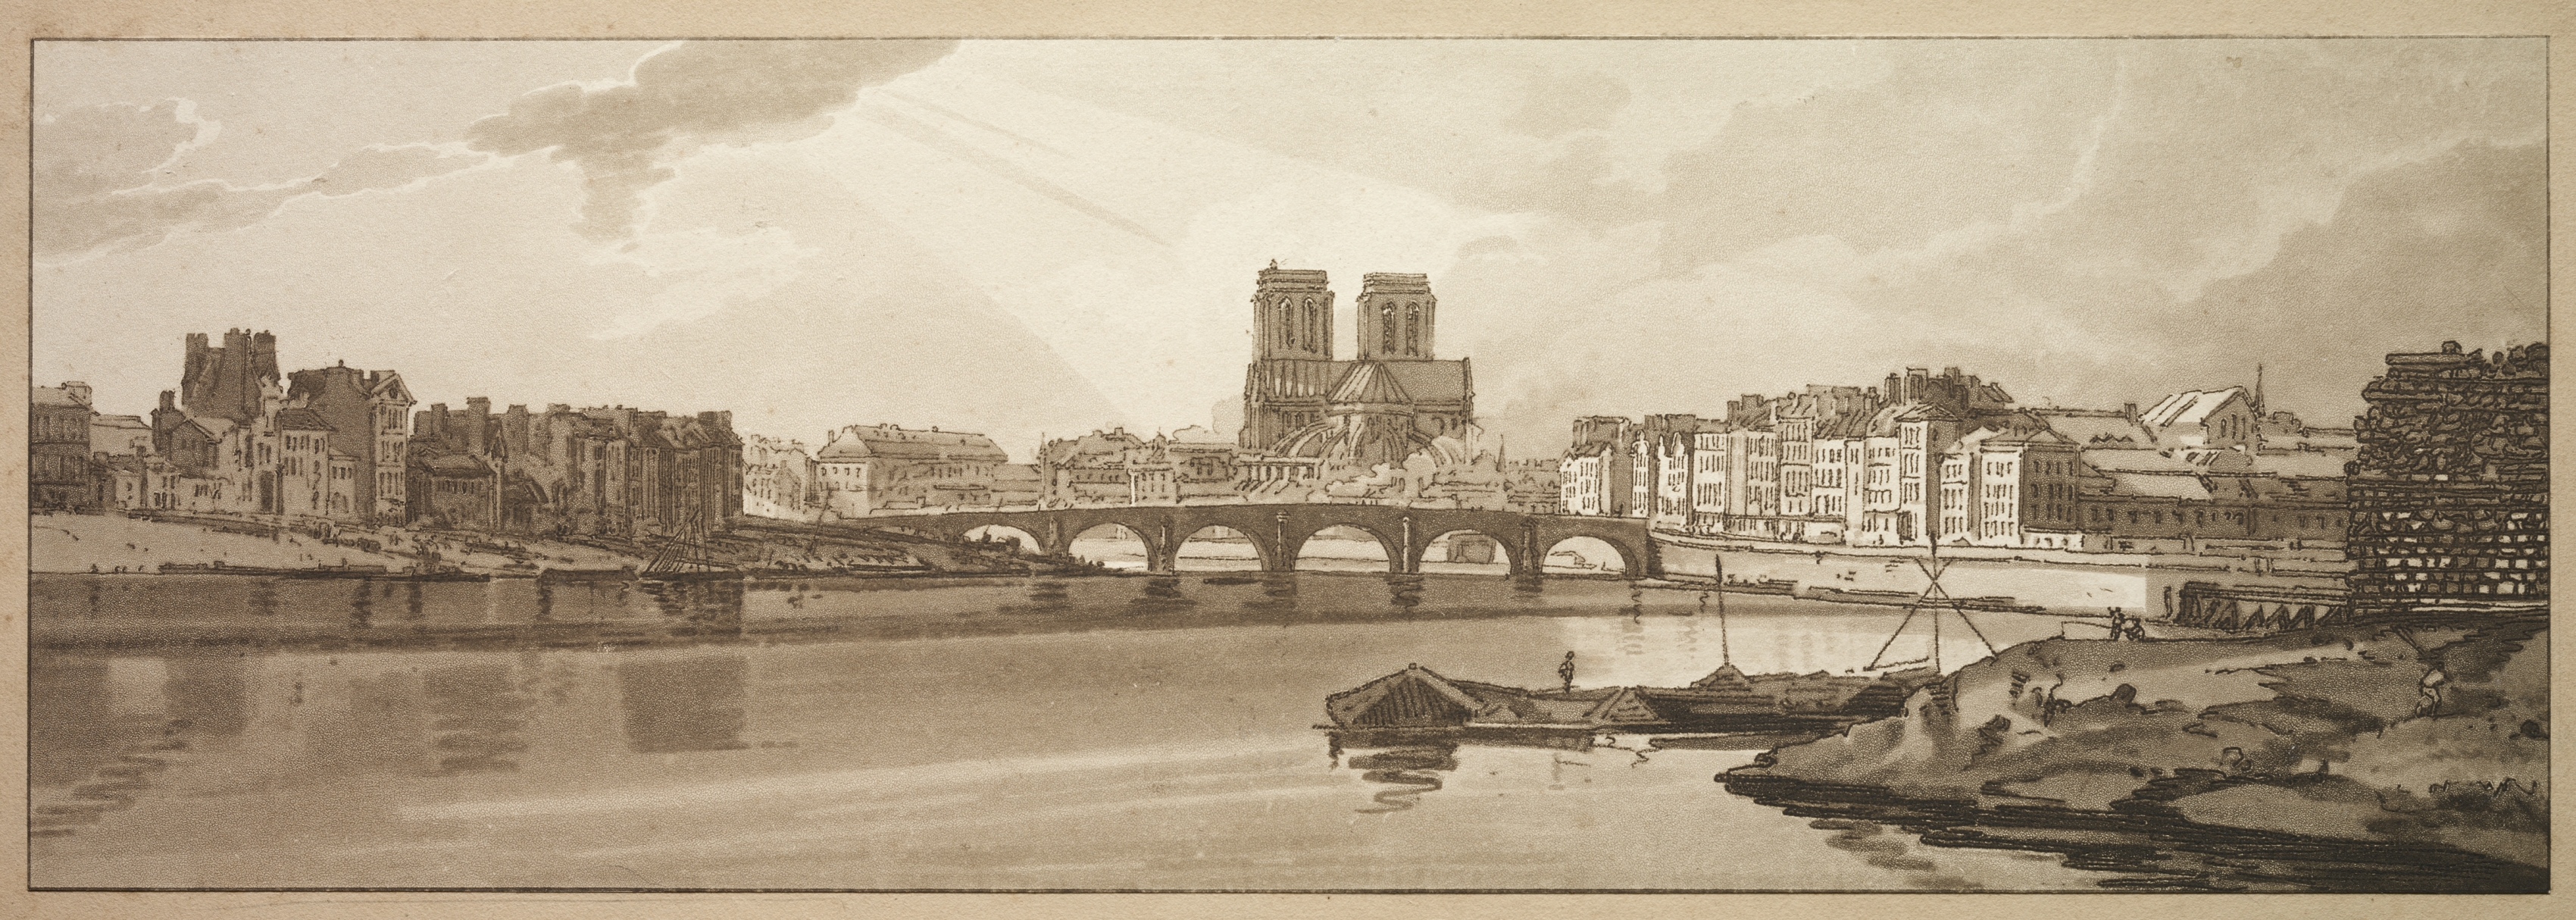 A Selection of Twenty of the Most Picturesque Views in Paris: View of Pont de la Tournelle & Notre Dame taken from the Arsenal